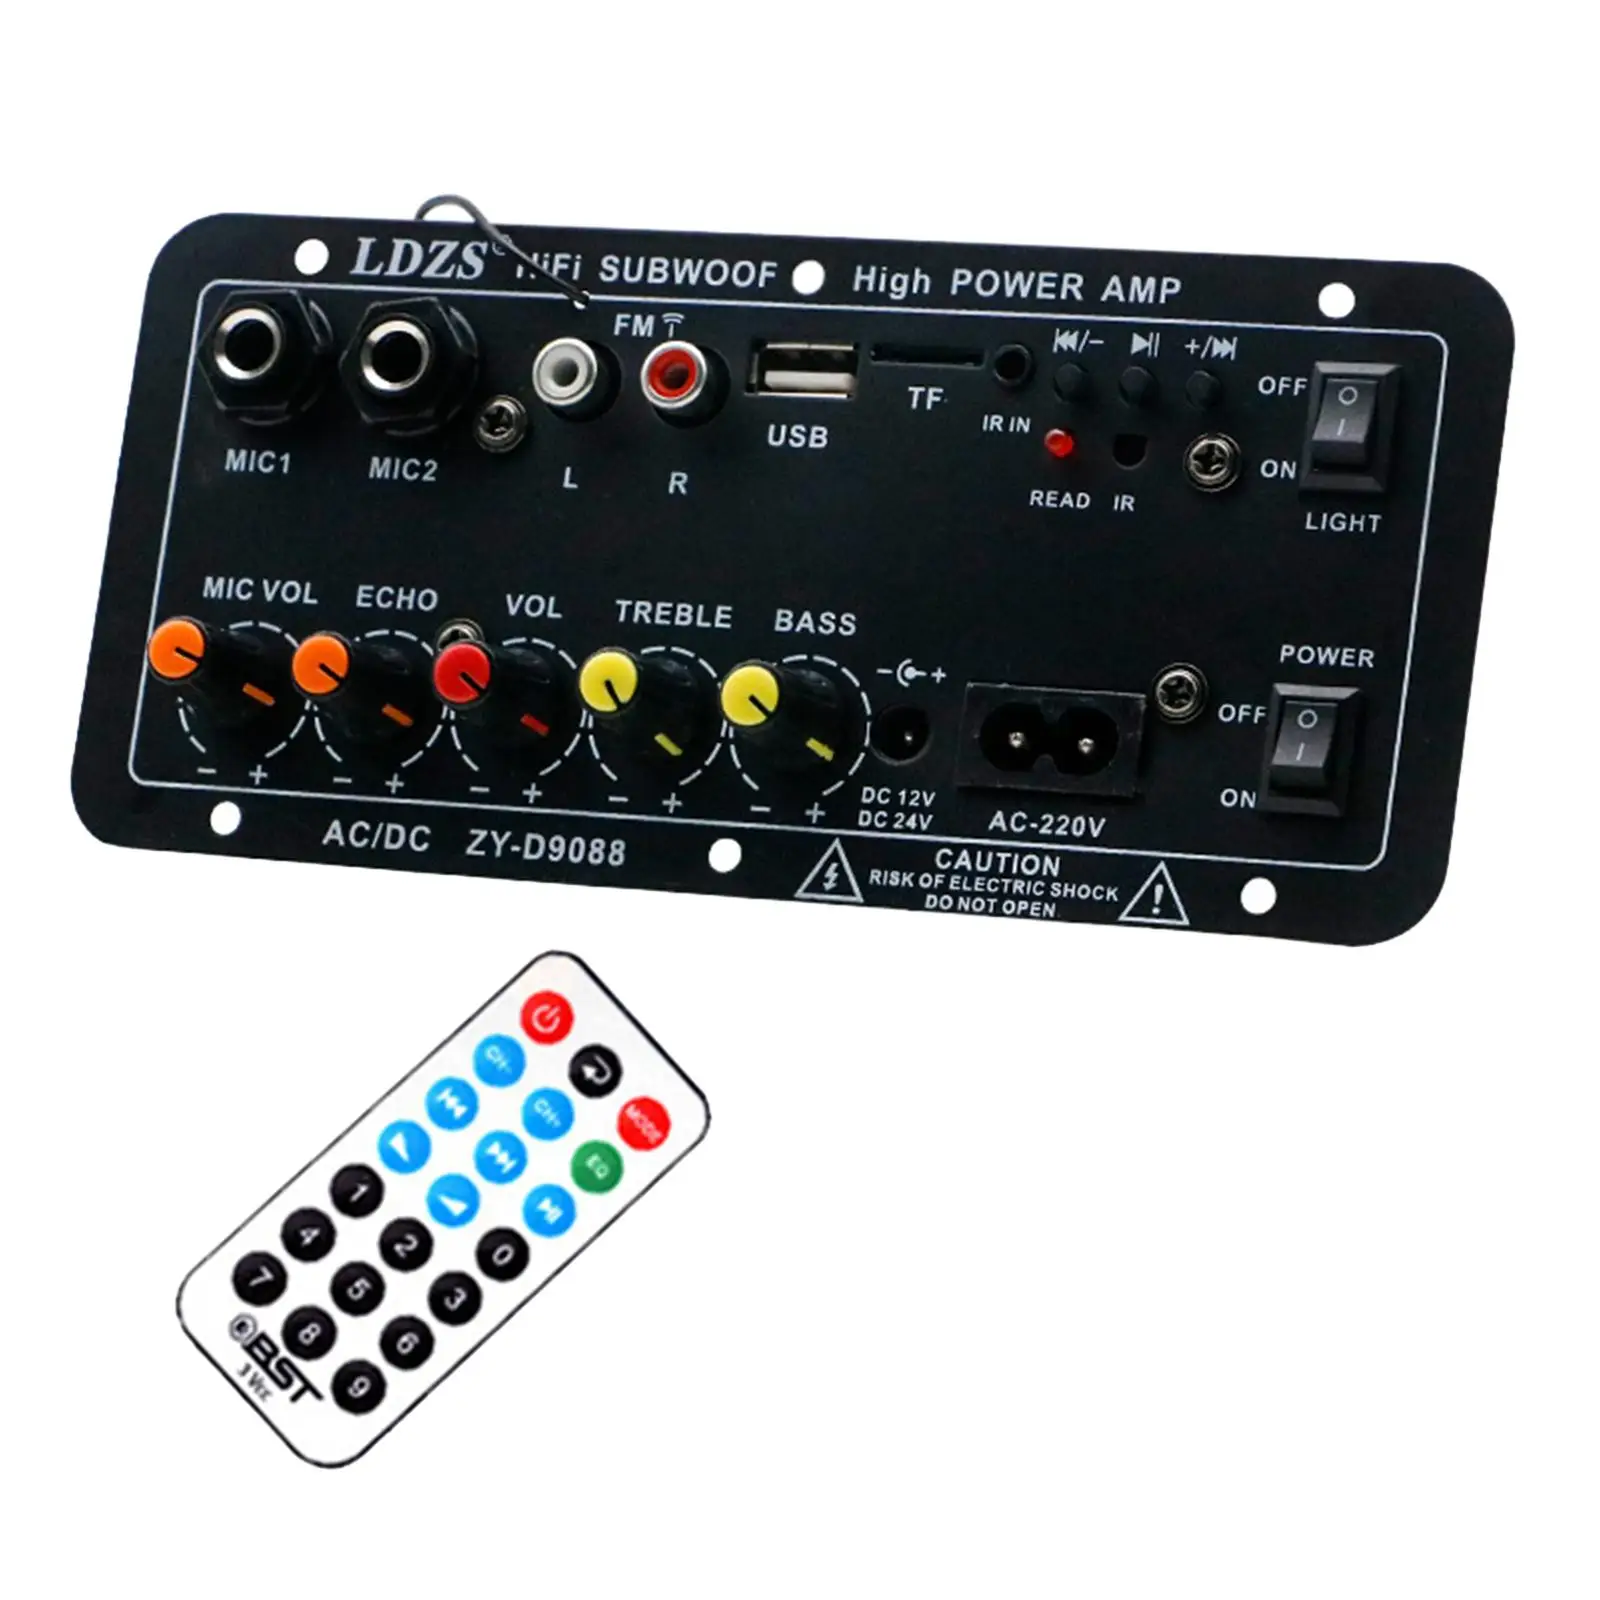 Microphone Karaoke Power Amplifier Board Professional Audio Mixer for Home Theater Desktop Computers Laptops Motorcycles Cars